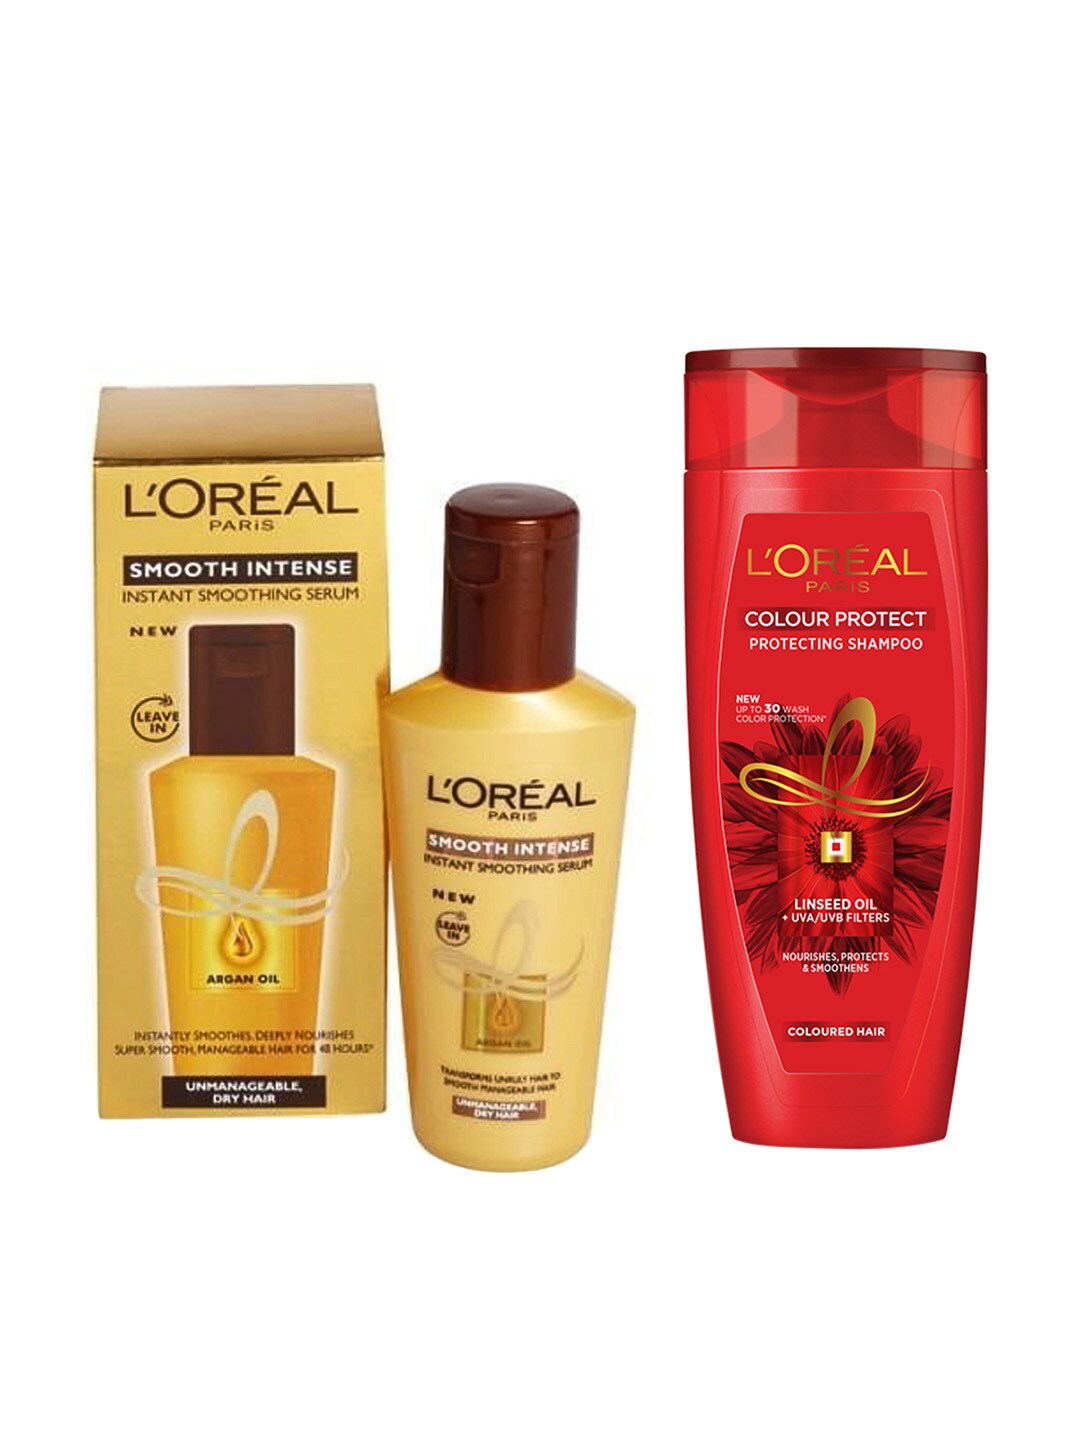 Loreal Paris Set of Instant Sustainable Hair Serum & Colour Protect Shampoo Price in India